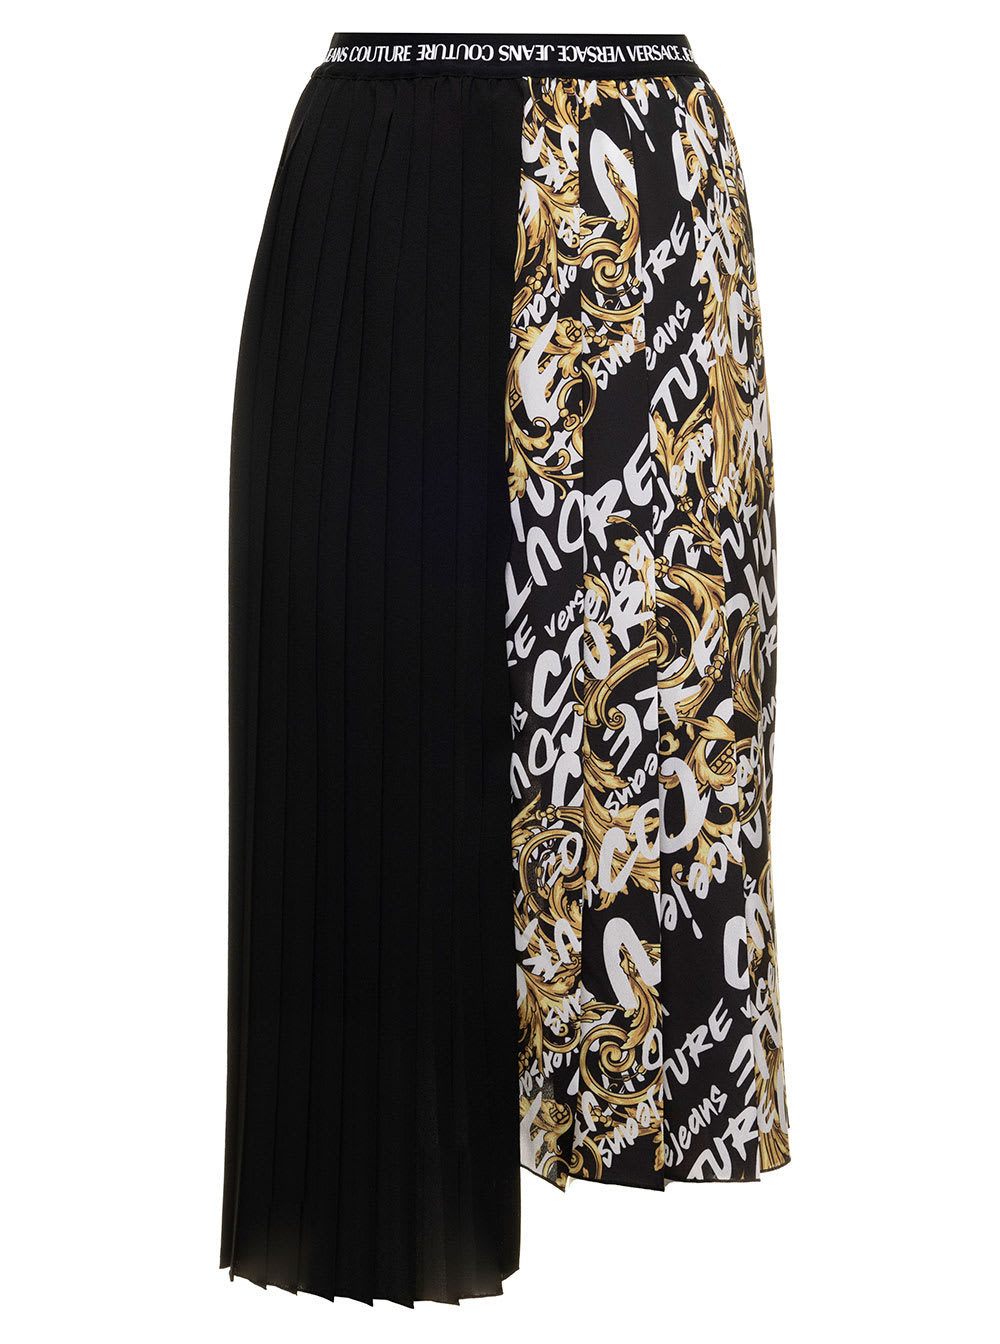 Asymmetric Black And White Midi Skirt In Crepe Versace Jeans Couture Woman